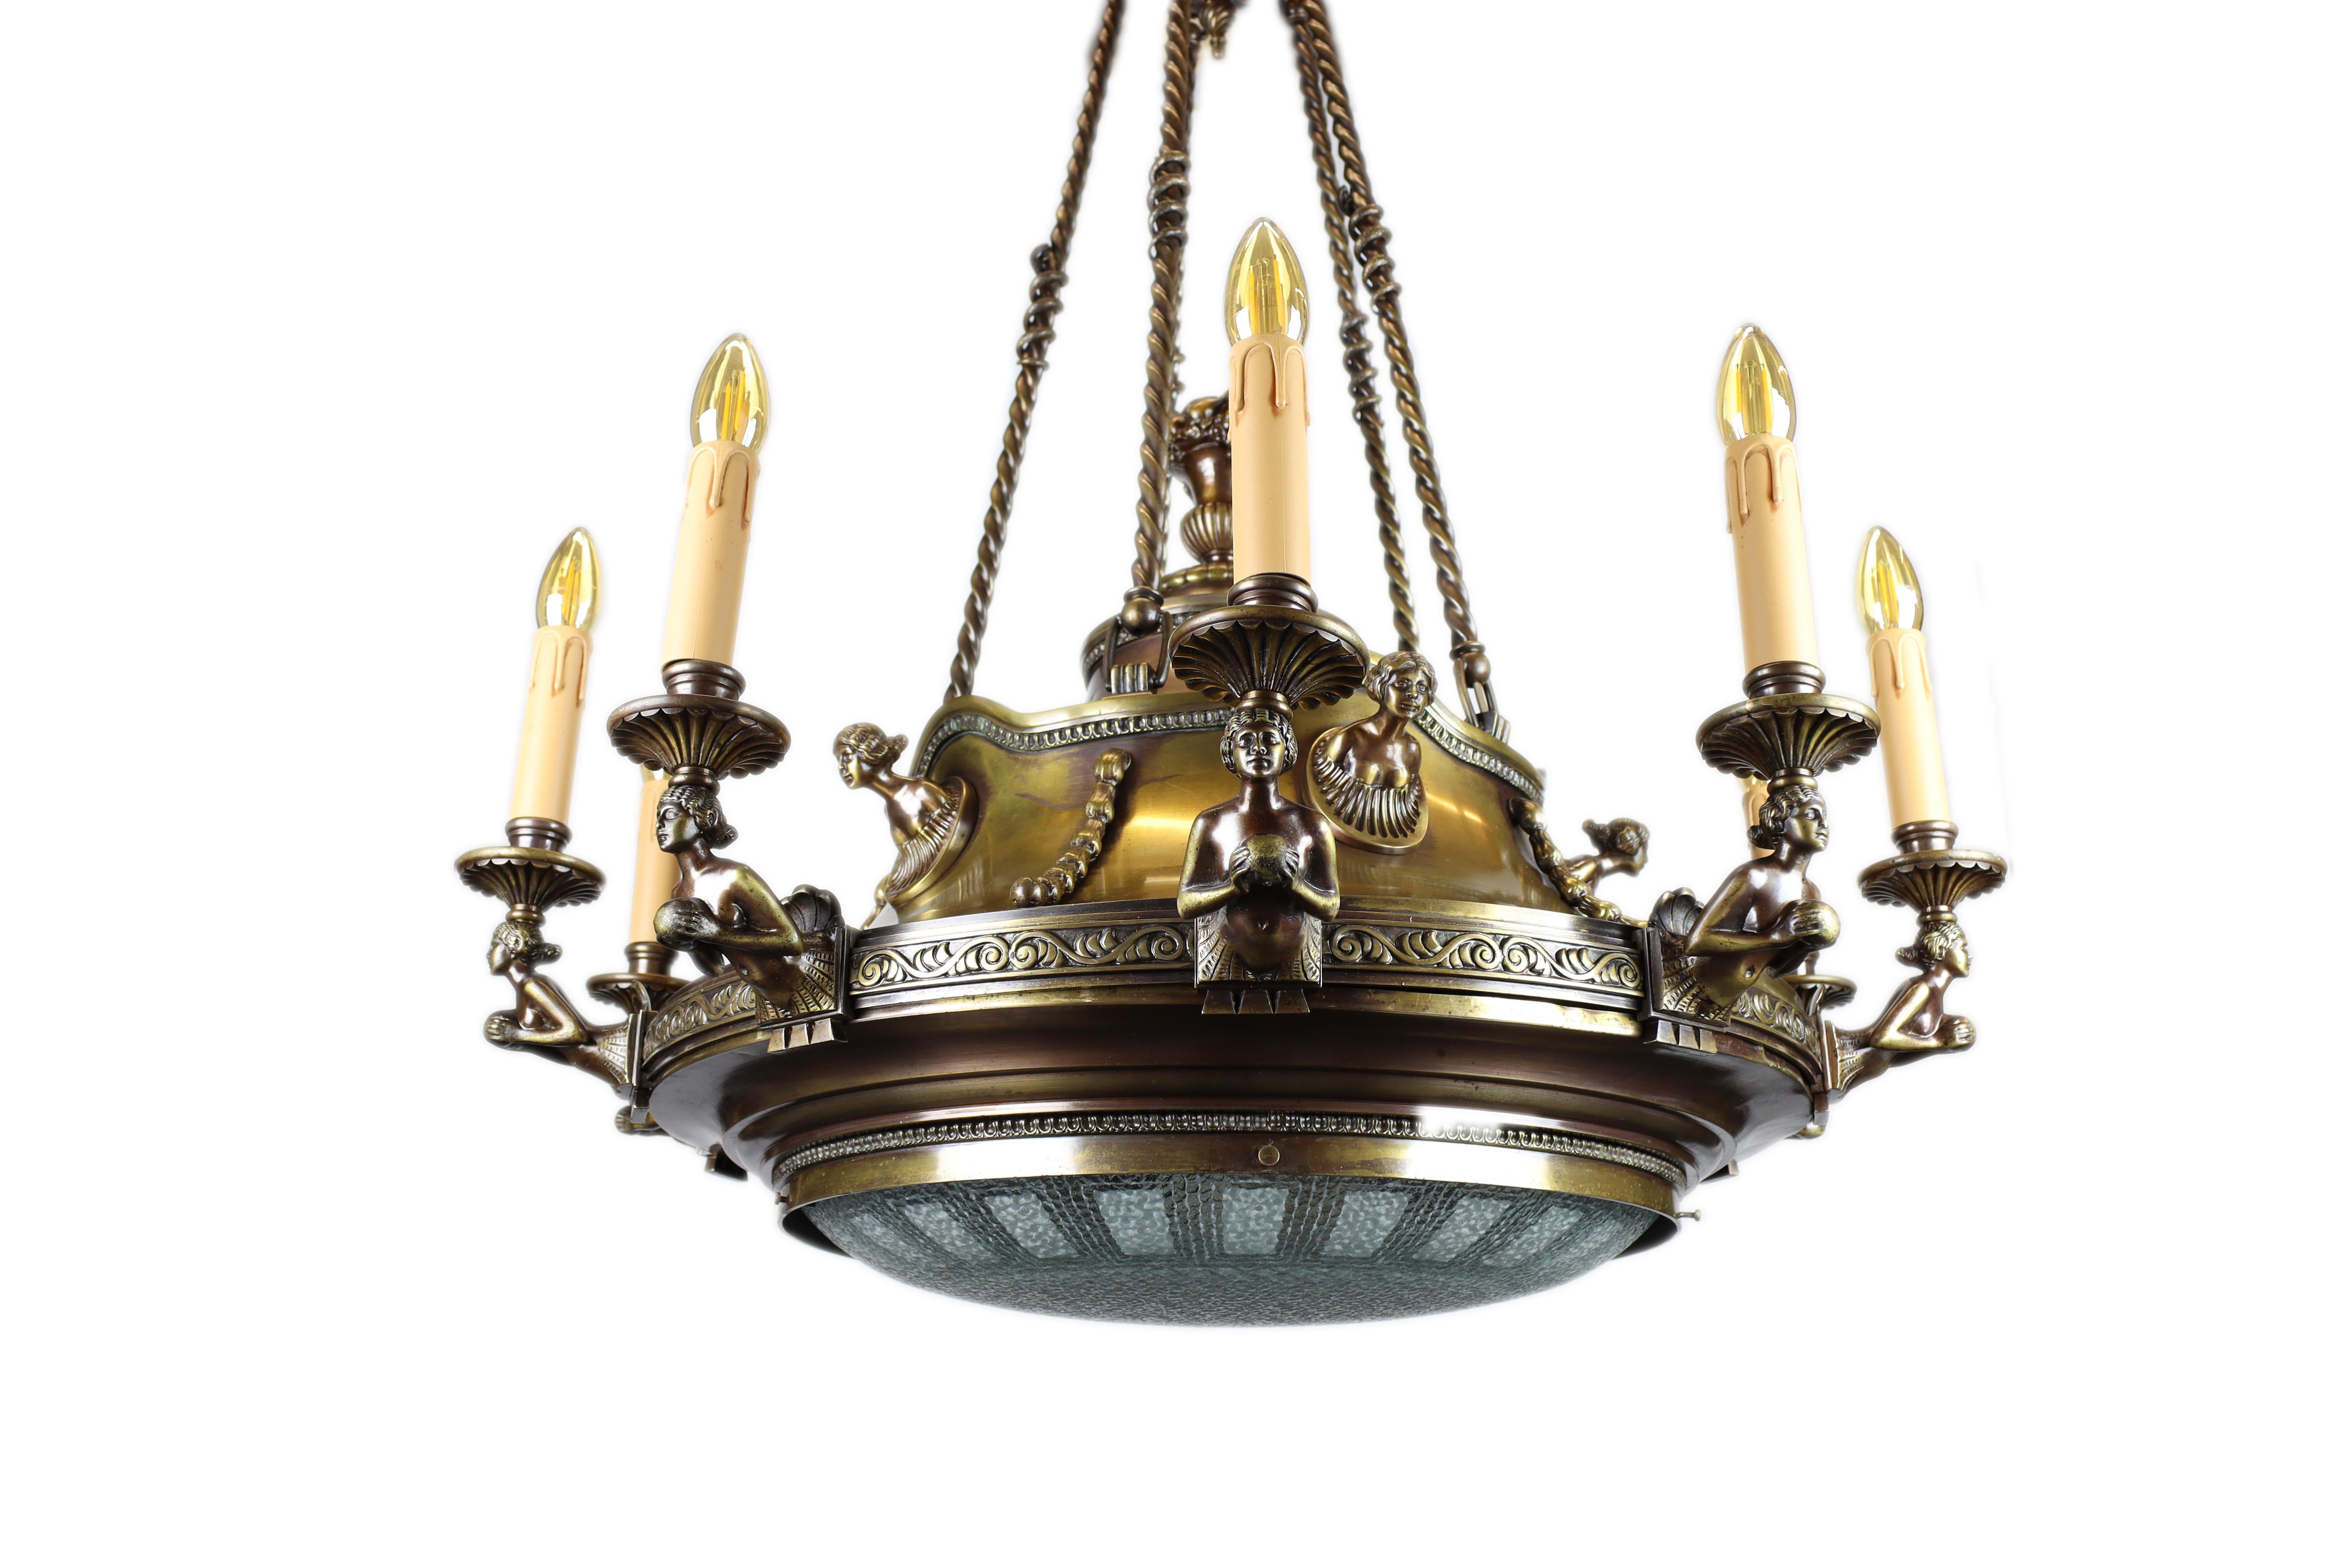 This beautiful representative chandelier from the Art Nouveau period was made around 1918. It is decorated with a beautifully shaped figural depiction of figures, each of the ten carrying one candle around the perimeter. All figural elements are